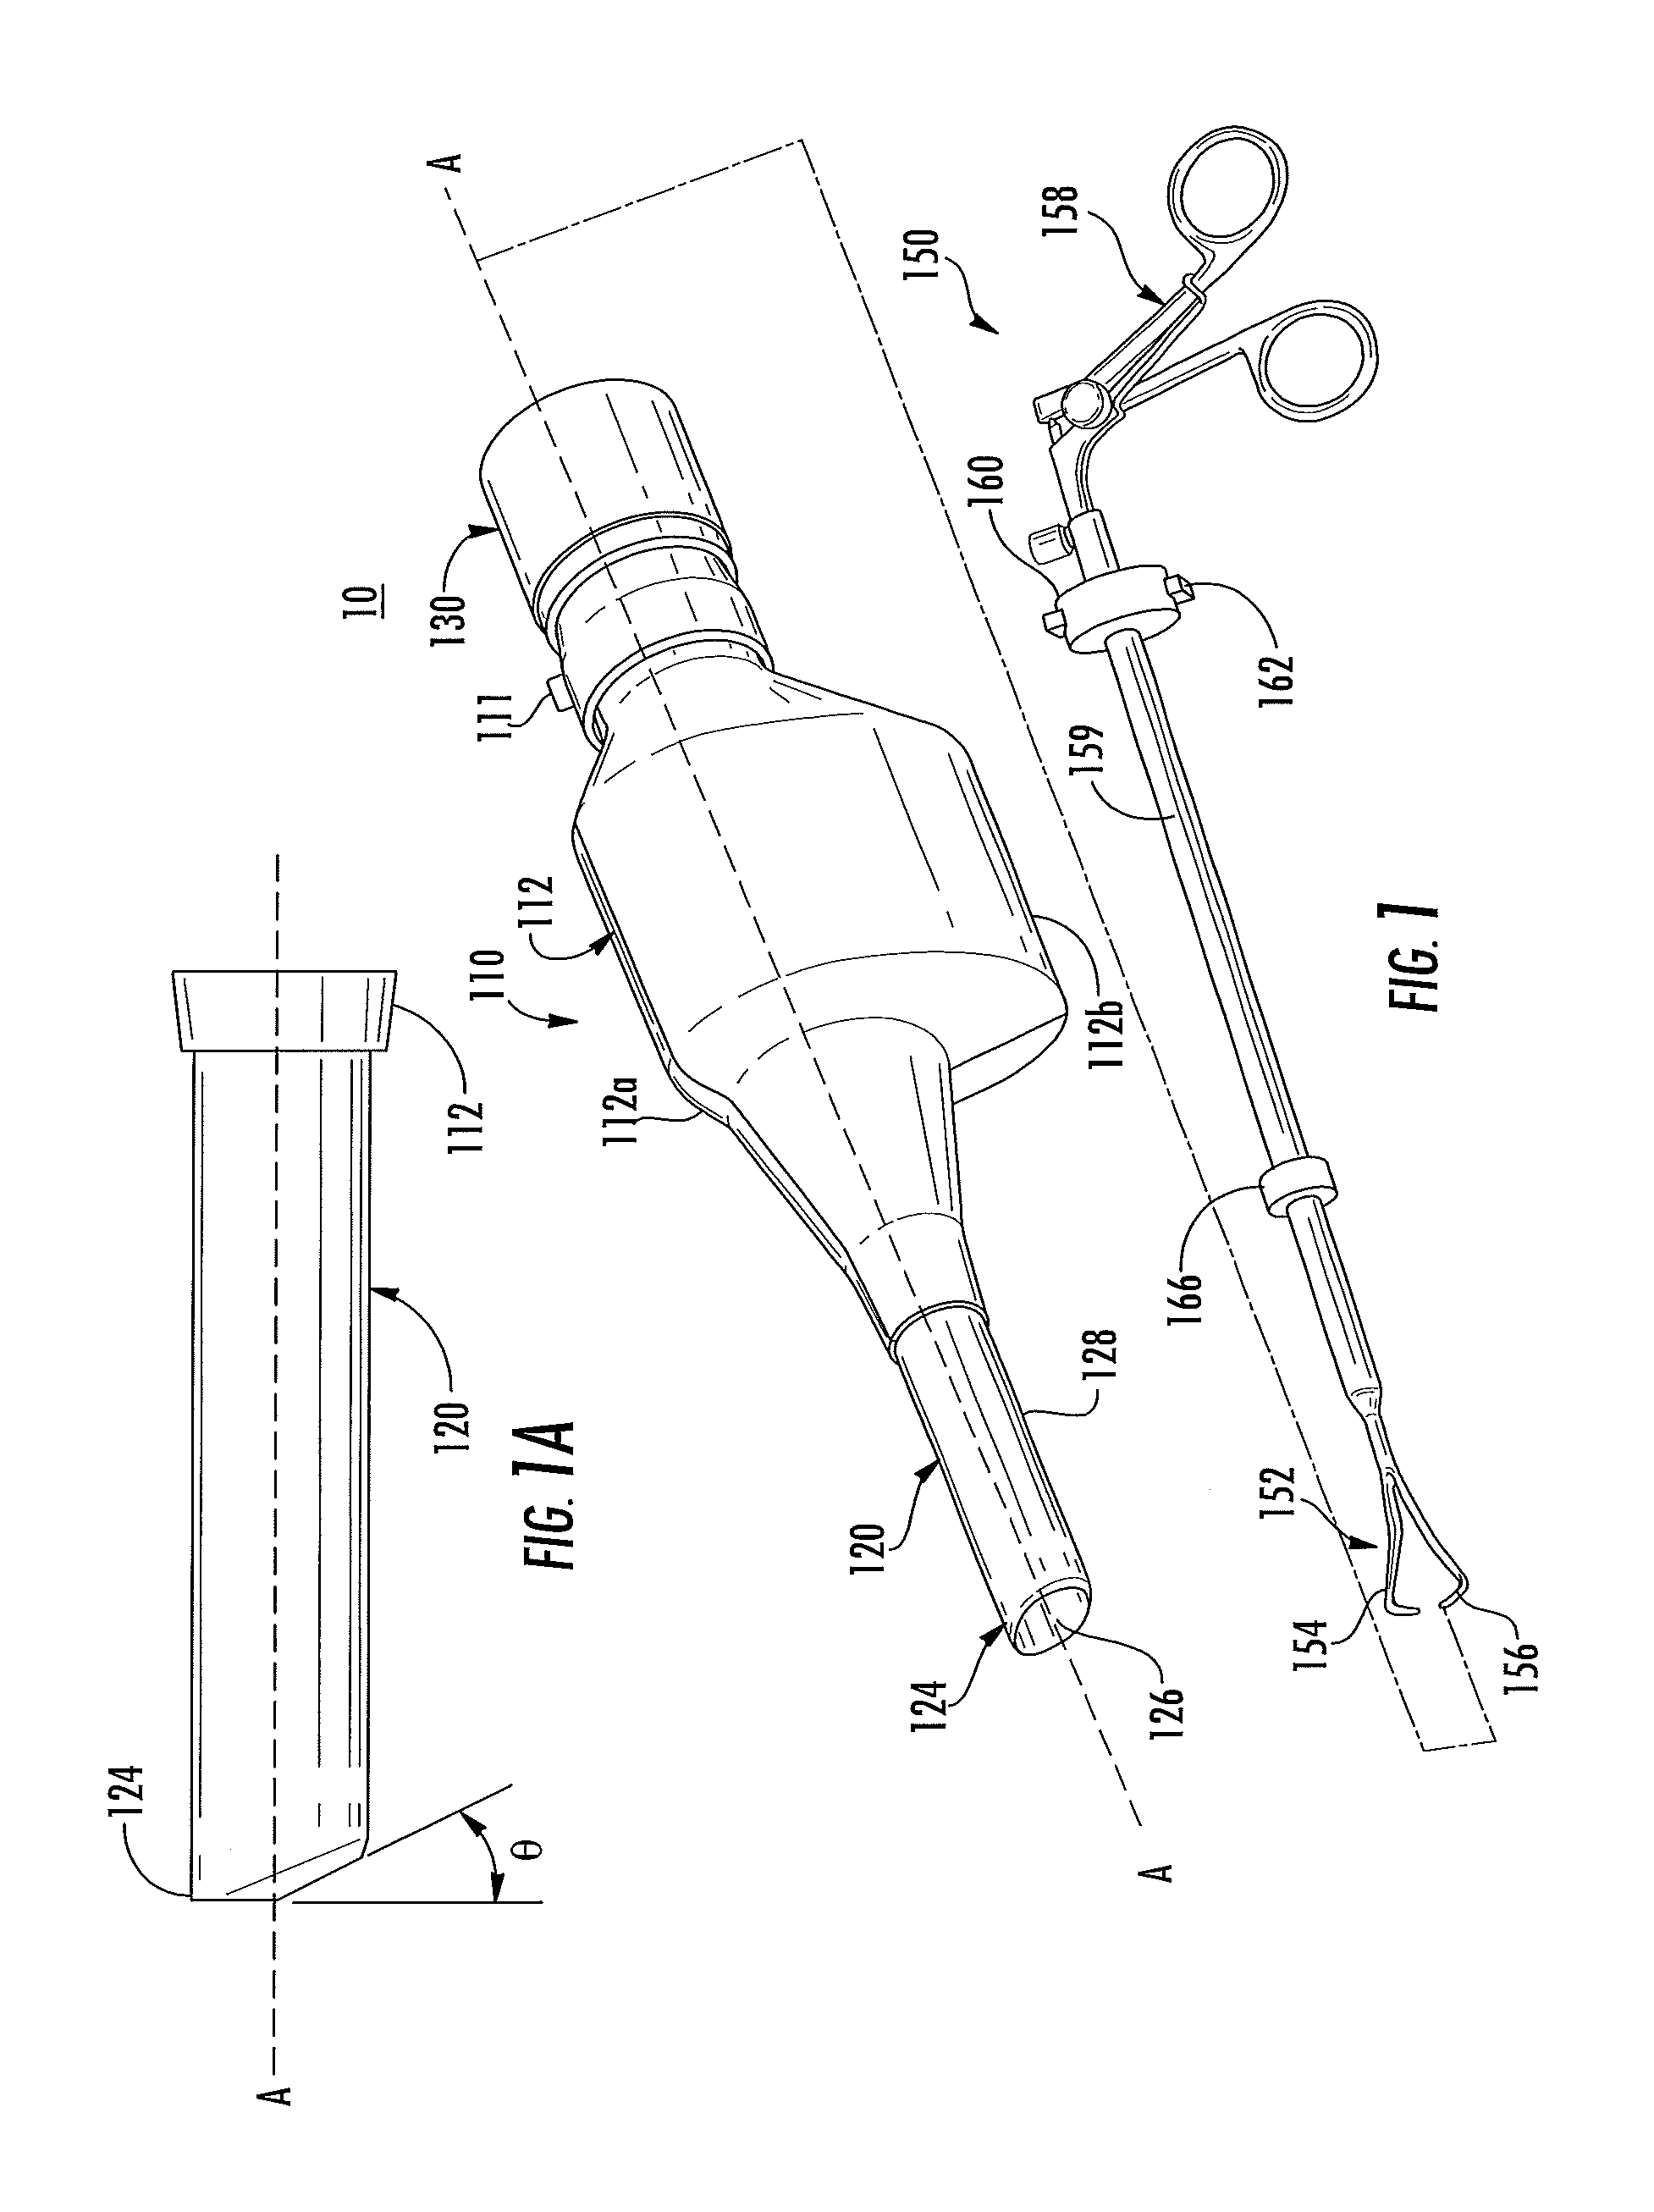 Devices, systems, and methods for tissue morcellation